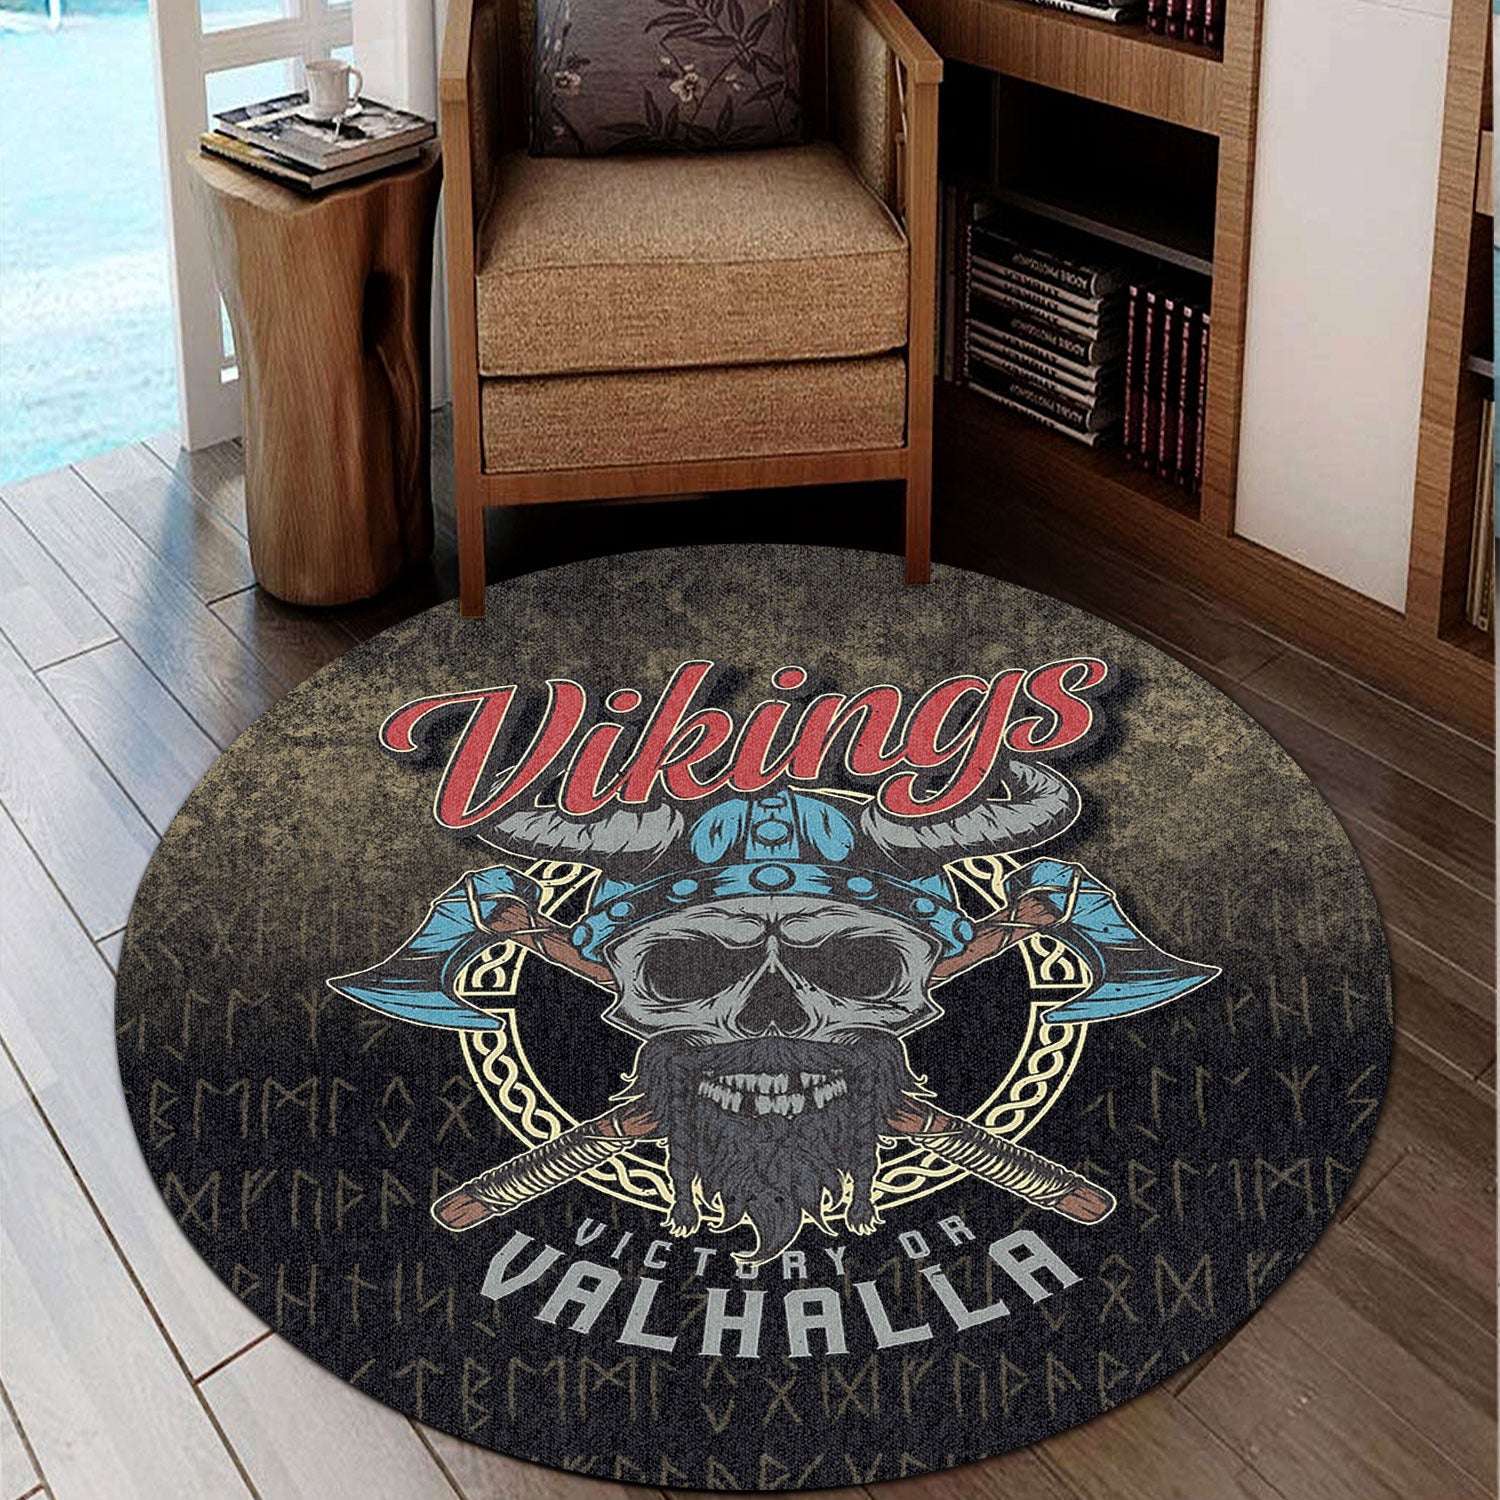 wonder-print-round-carpet-vikings-victory-or-valhalla-skull-with-crossed-axe-round-carpet